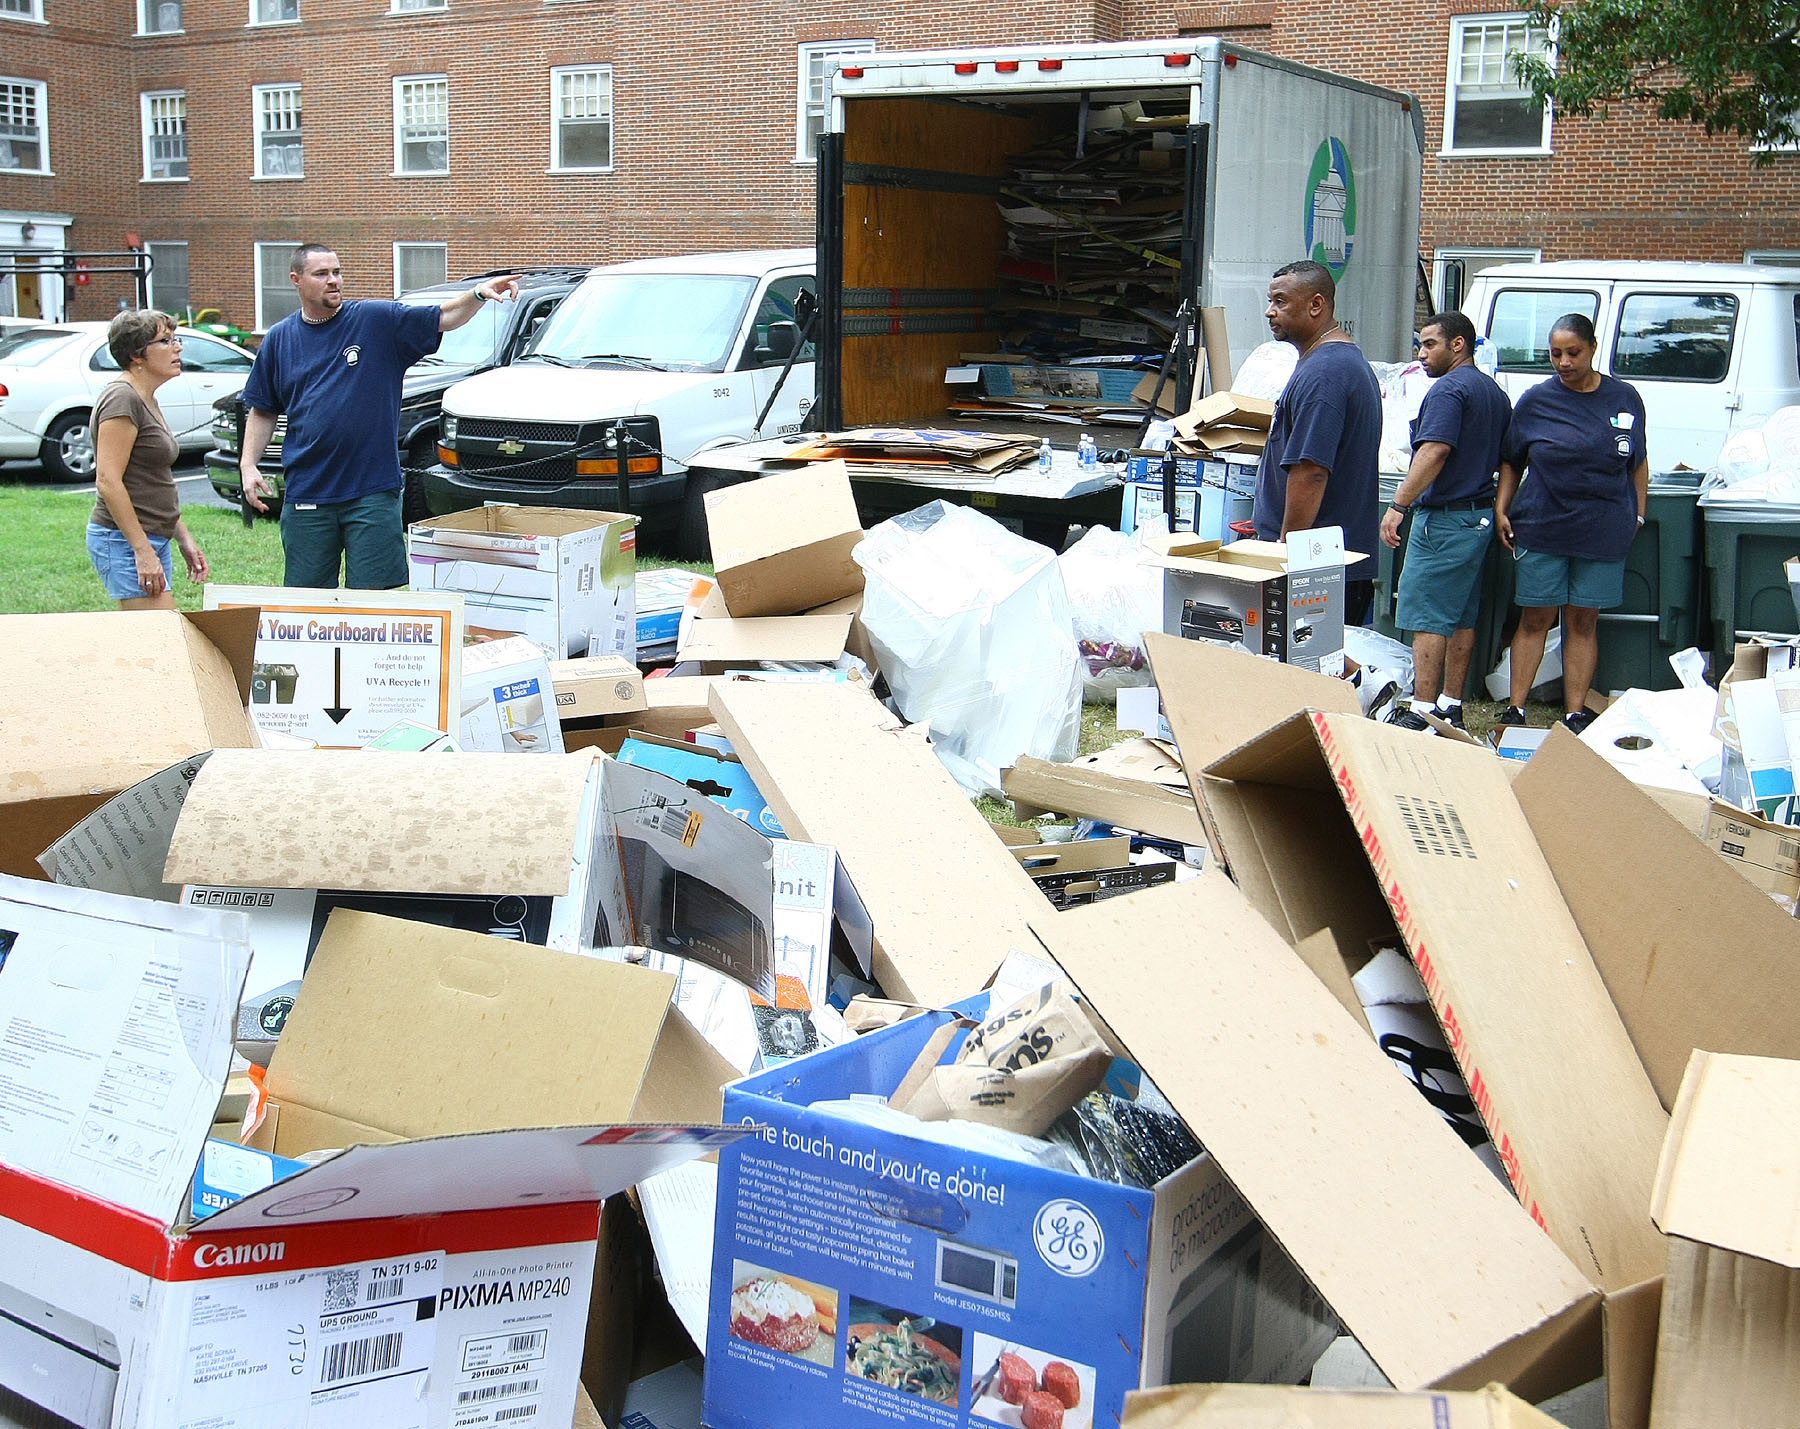 Piles of cardboard boxes being recycled outside of a dorm on move-in day